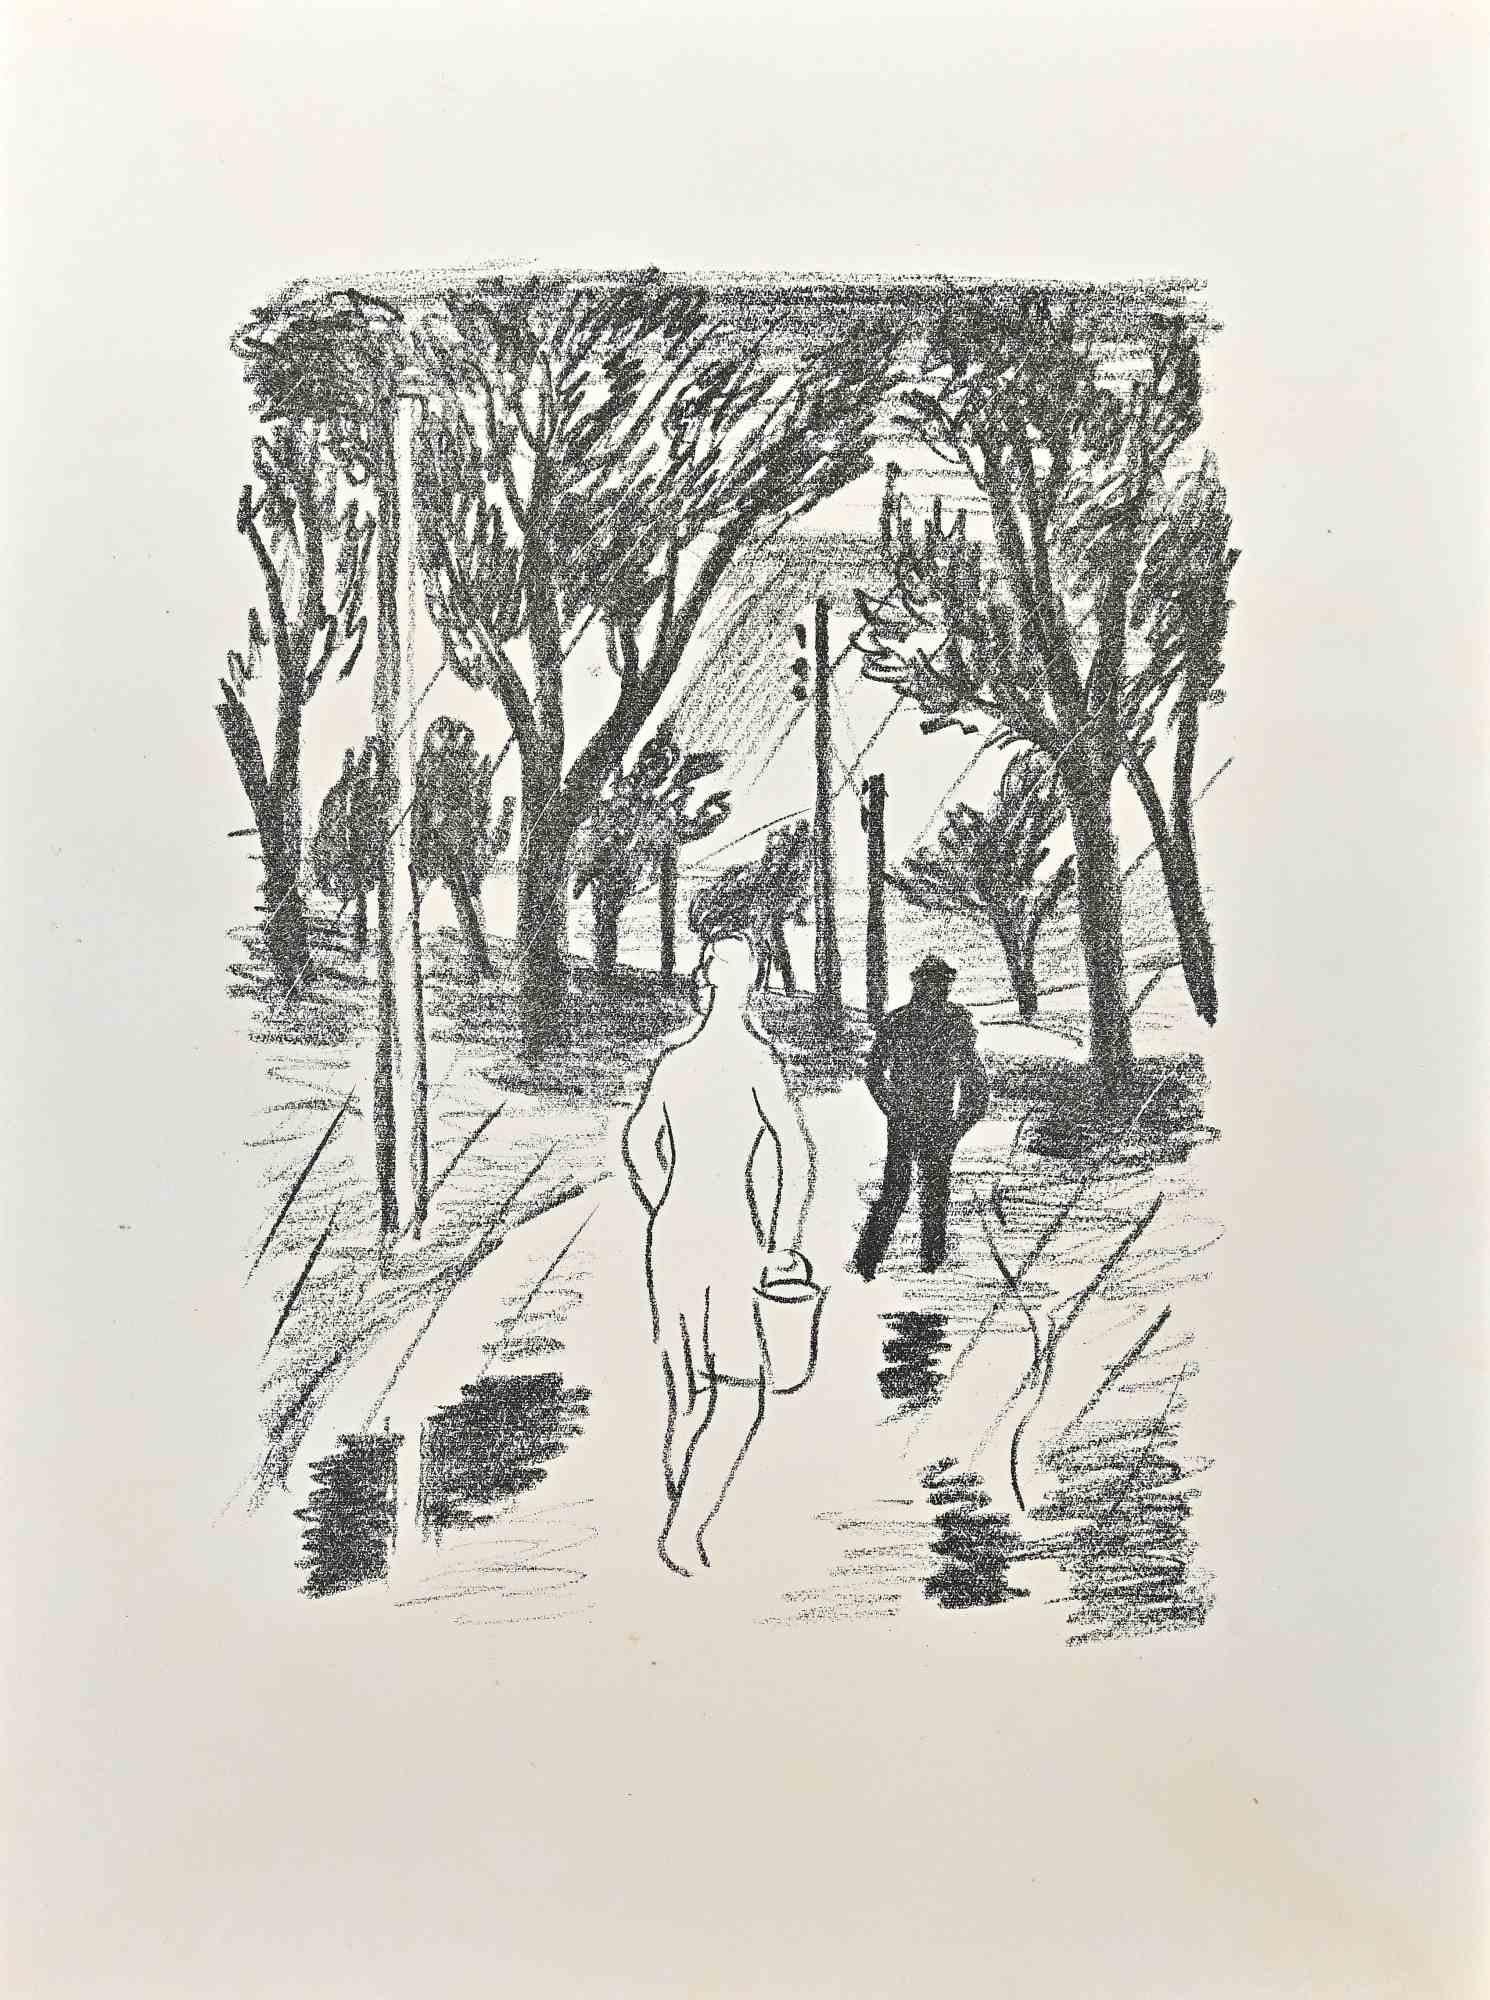 Wilhelm  Gimmi Figurative Print - Walking Into The Forest -Lithograph by W. Gimmi - 1955 ca.